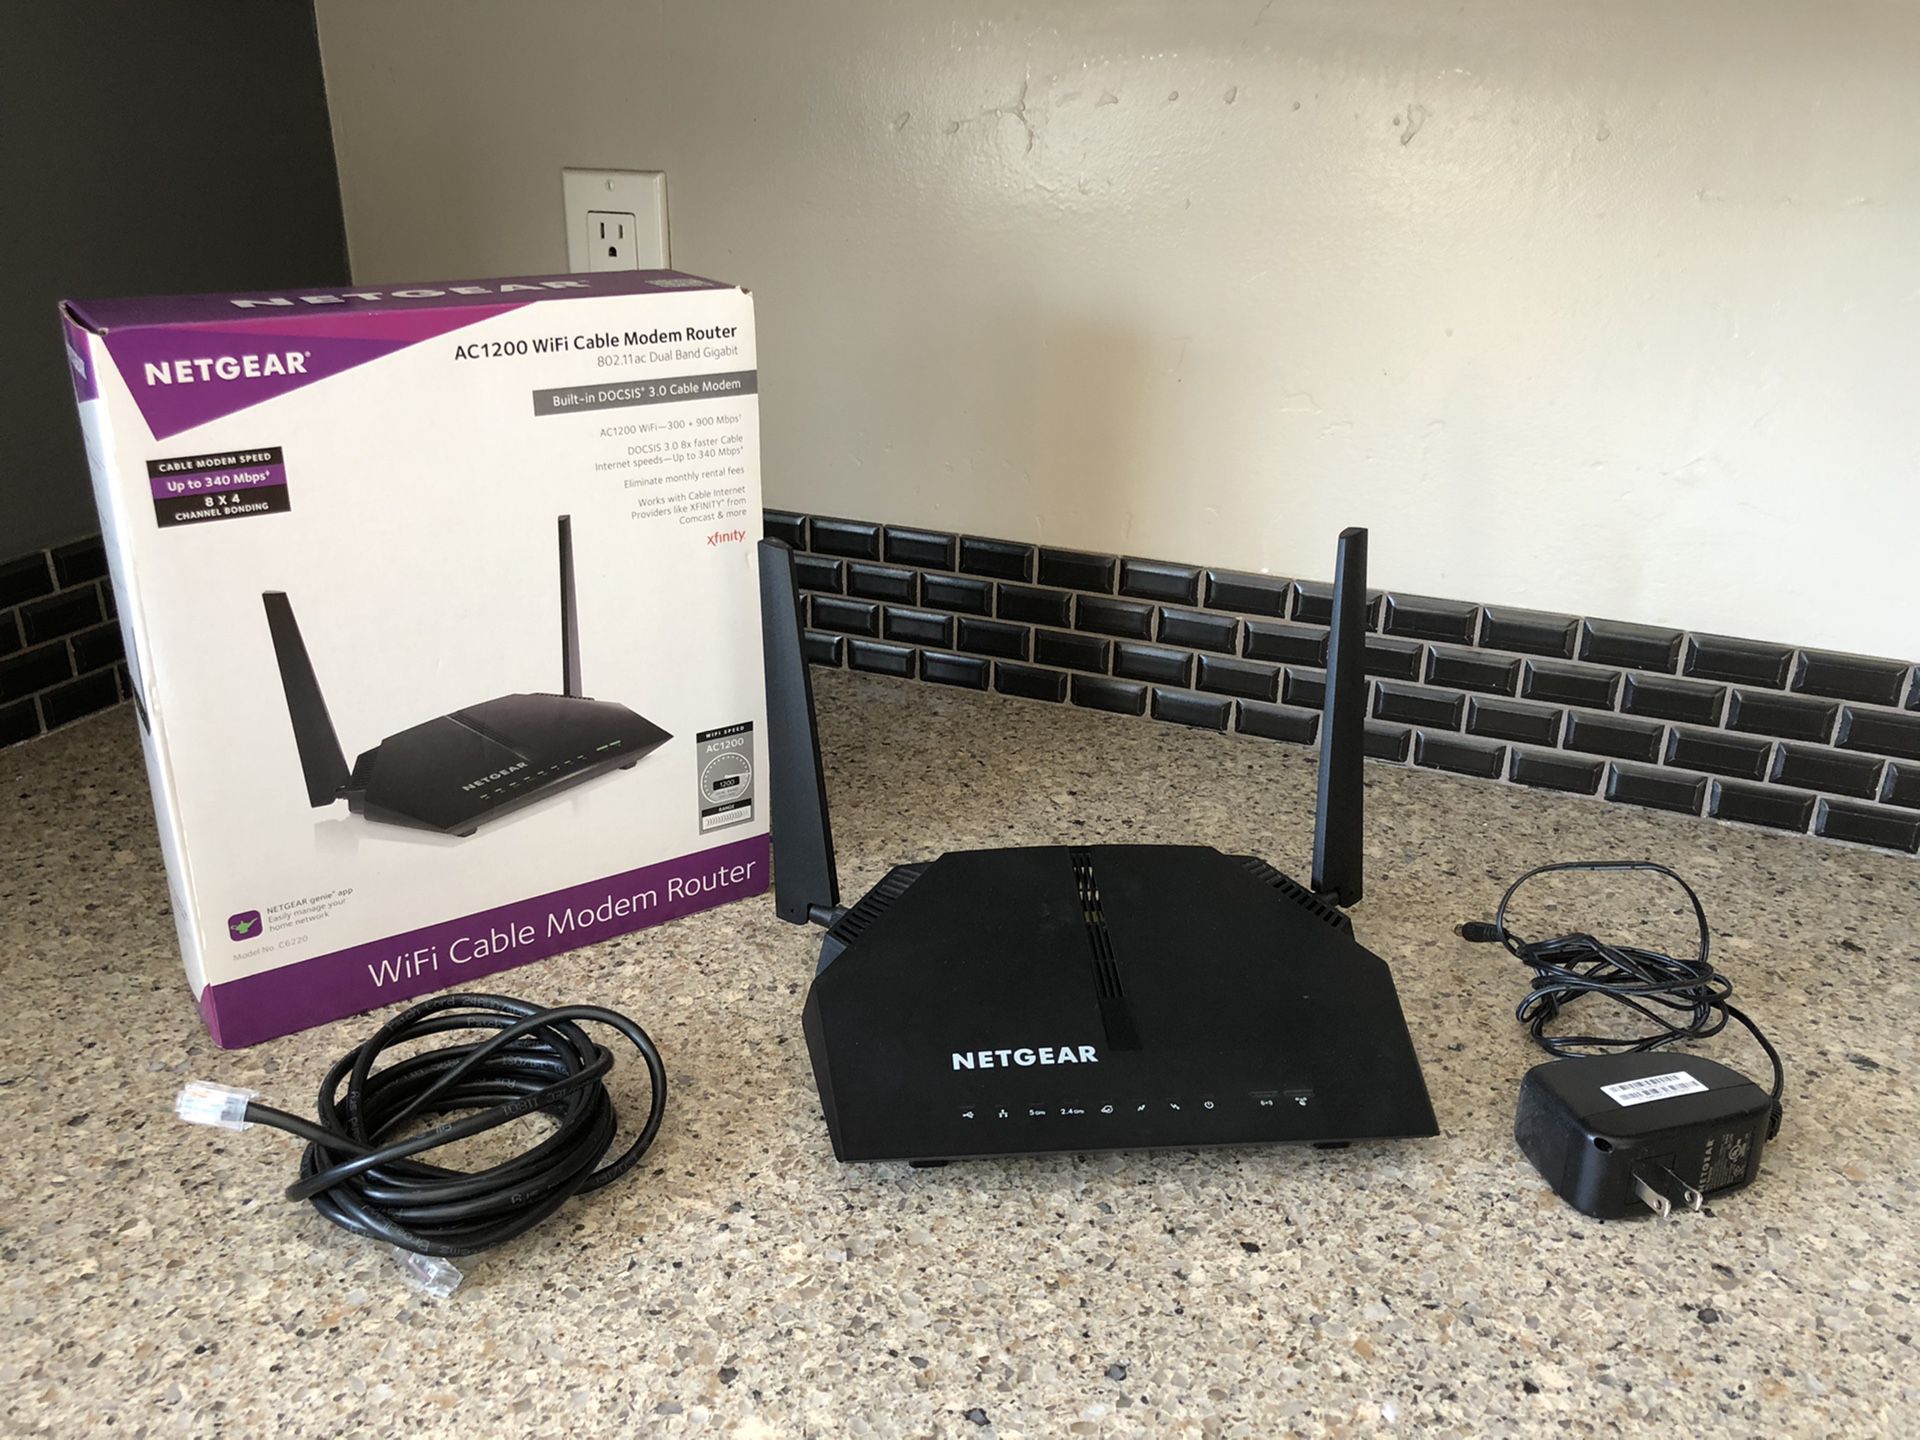 WiFi cable modem router (AC1200)